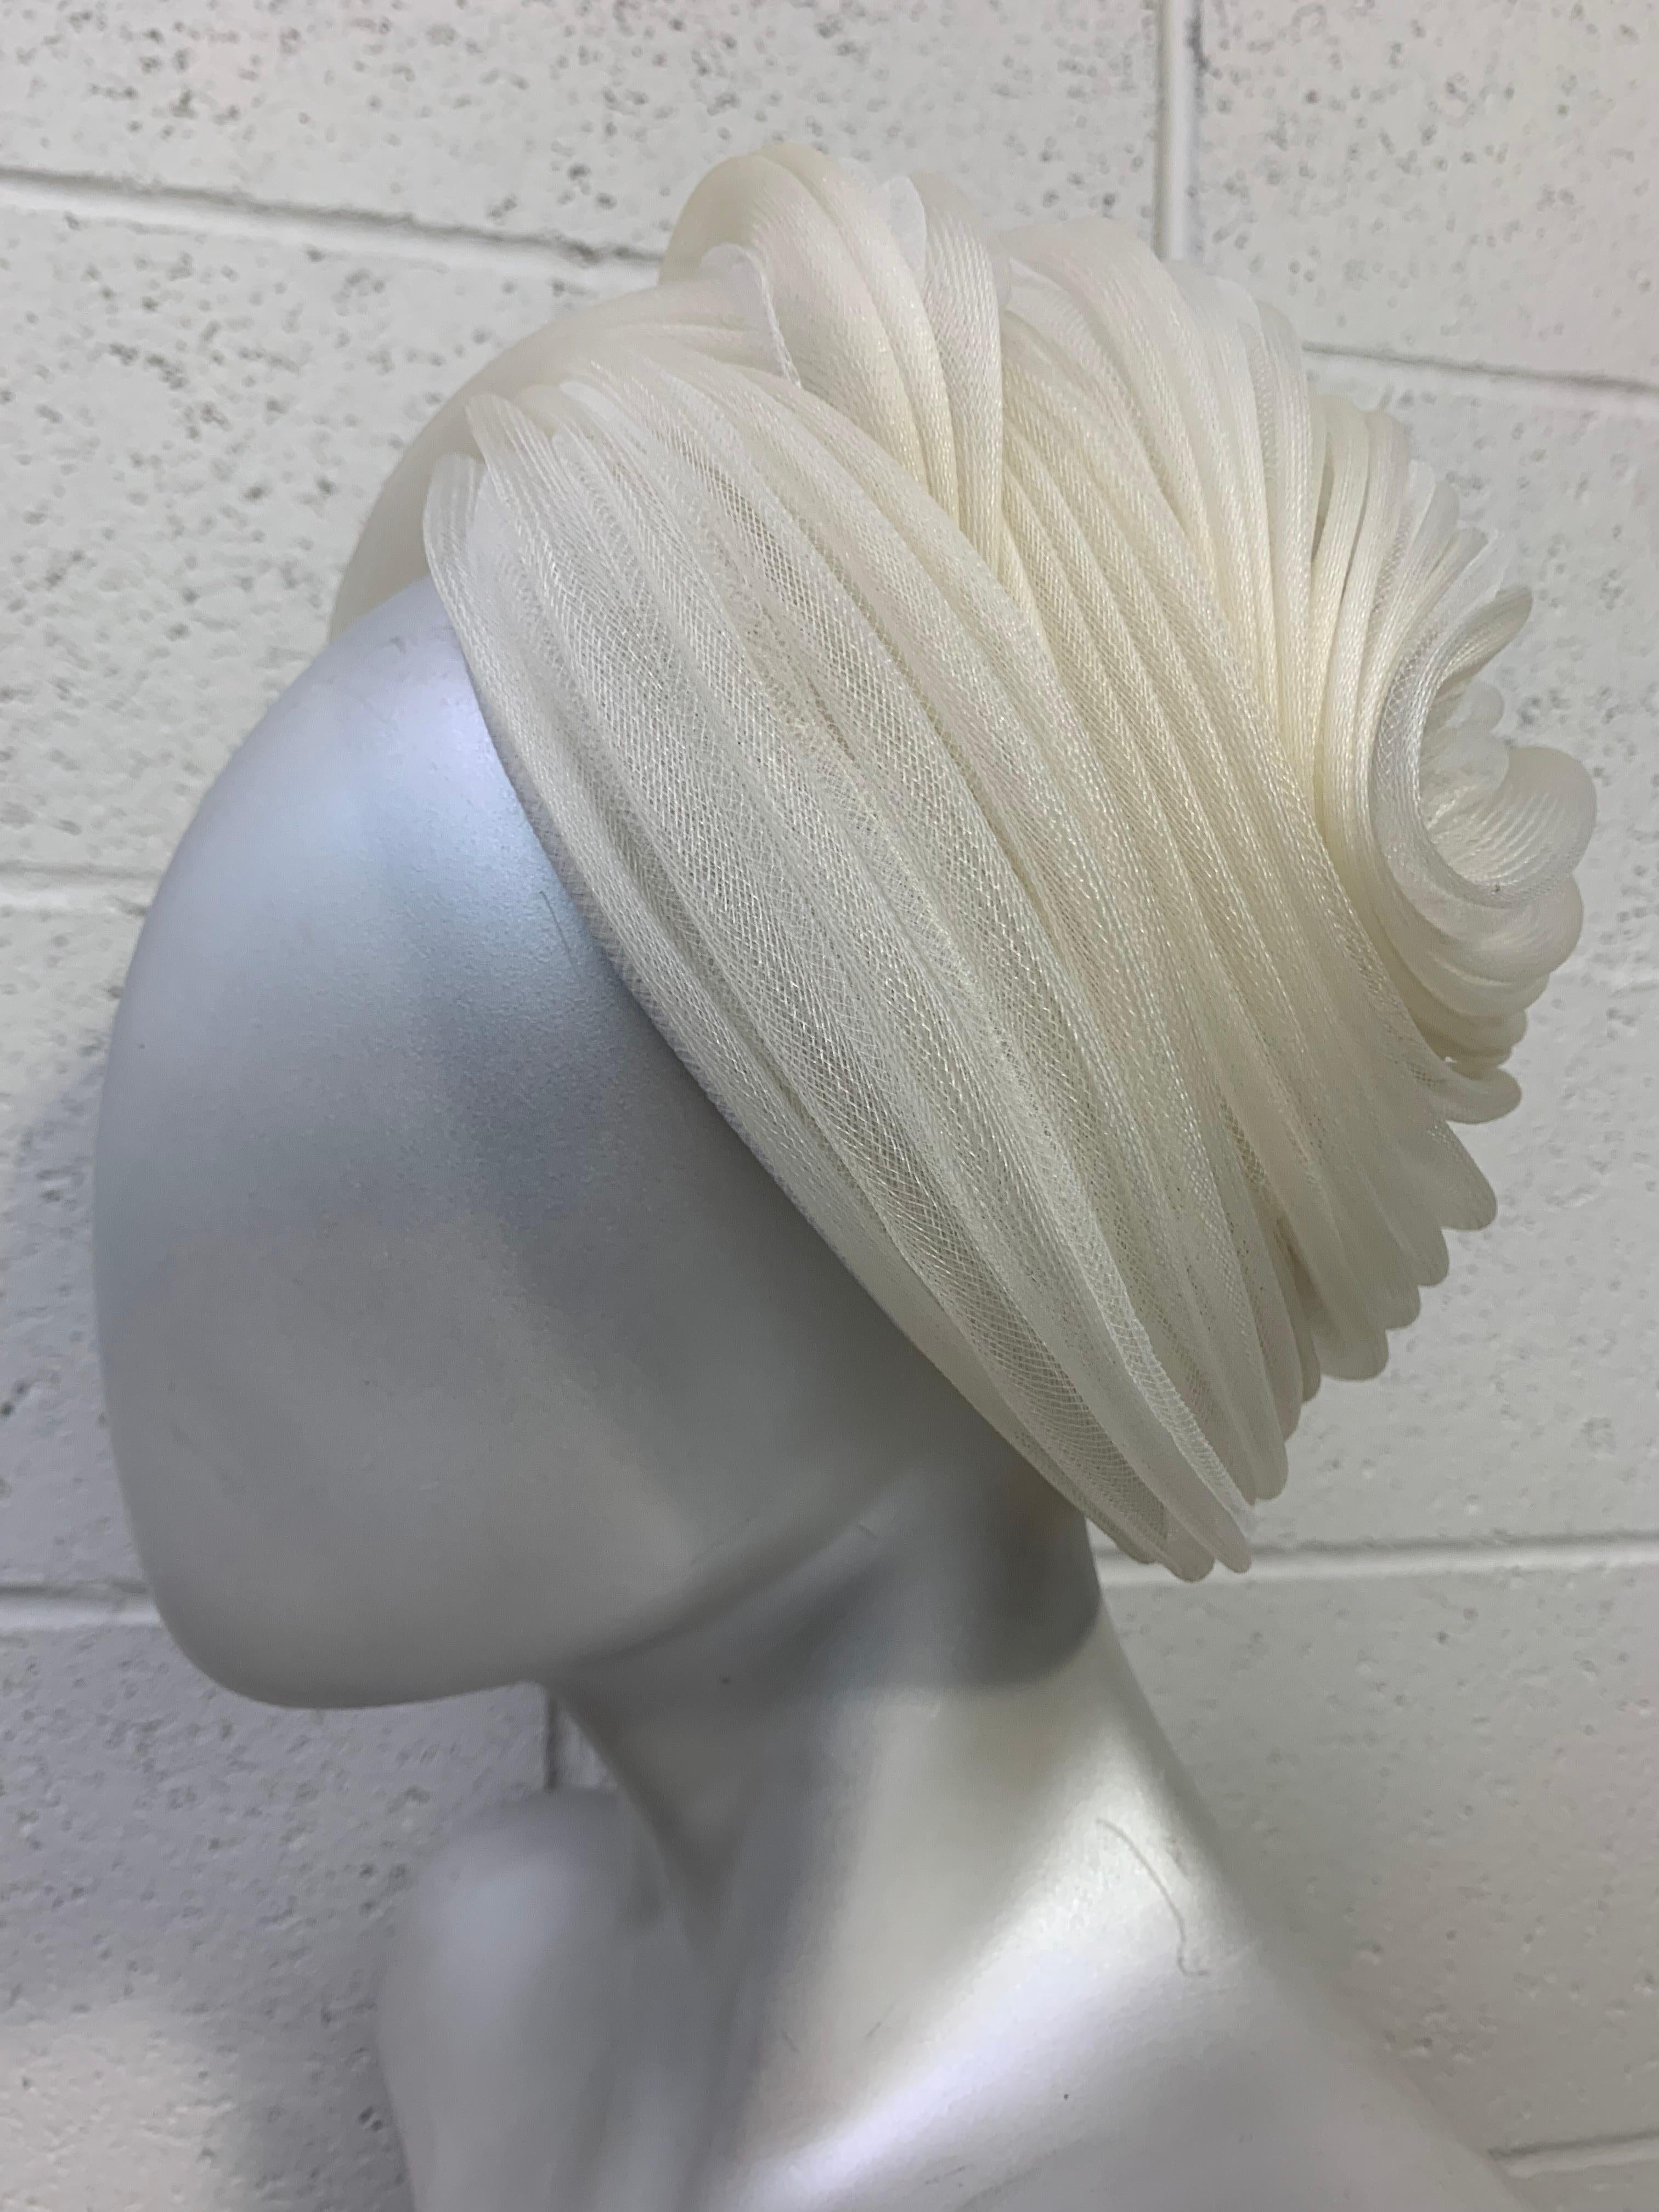 1960s Christian Dior Dramatic Snow White Coiled Tulle Turban: Stiffened bubble shape in sinuous coiled design to be worn at crown with center peak. Comes with original box. Hat is in pristine condition.  Size medium. 